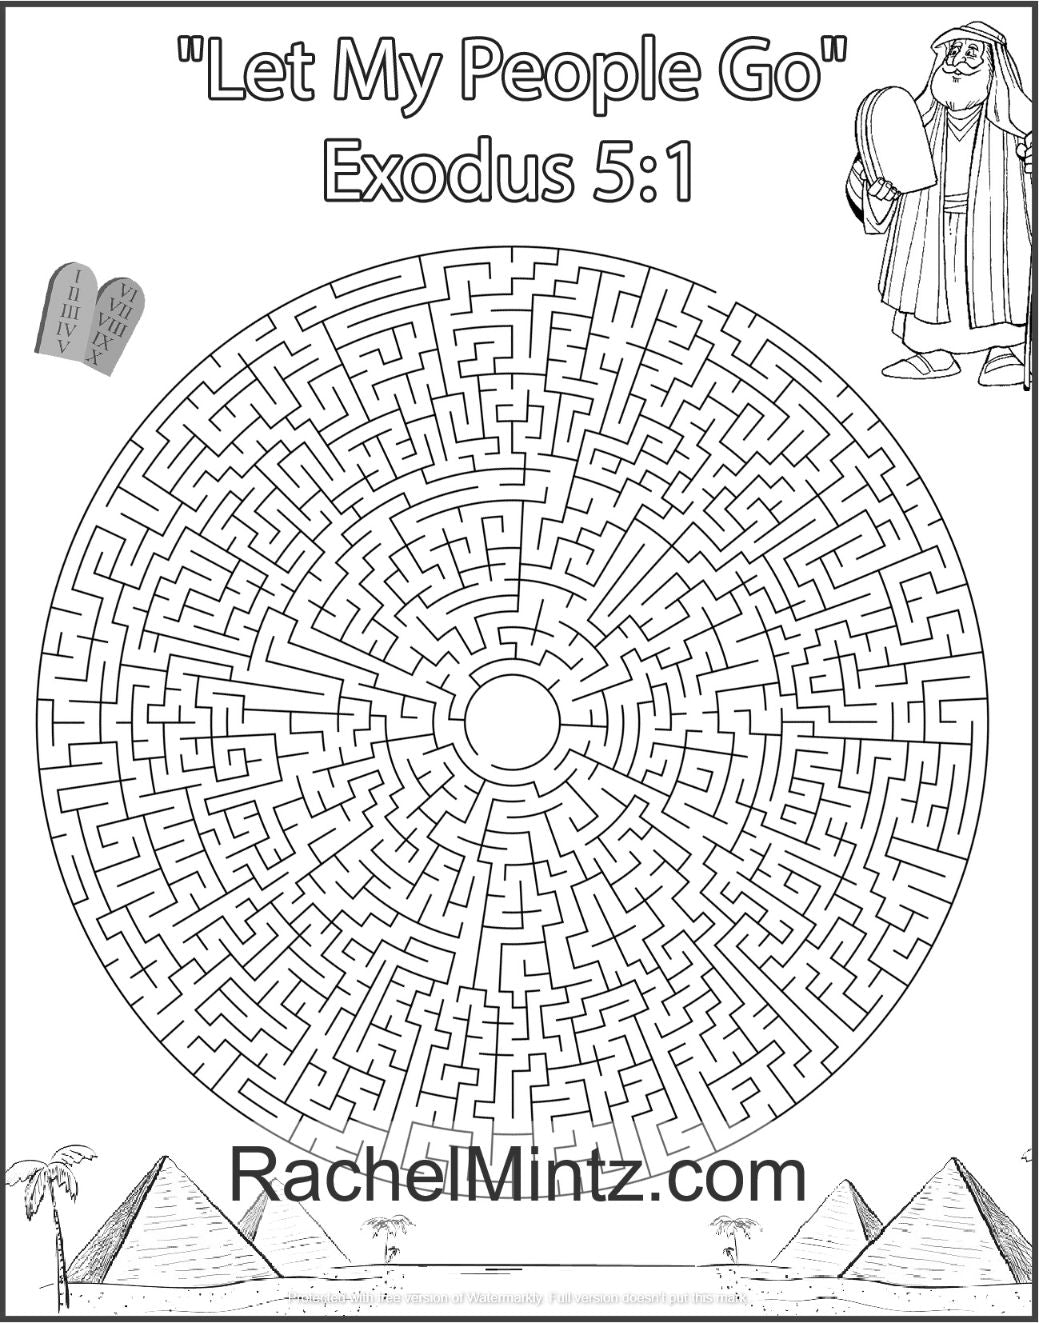 50 Passover Mazes - Activity Pages For Pesch, Seder Activity For Kids and Adults (PDF Format)